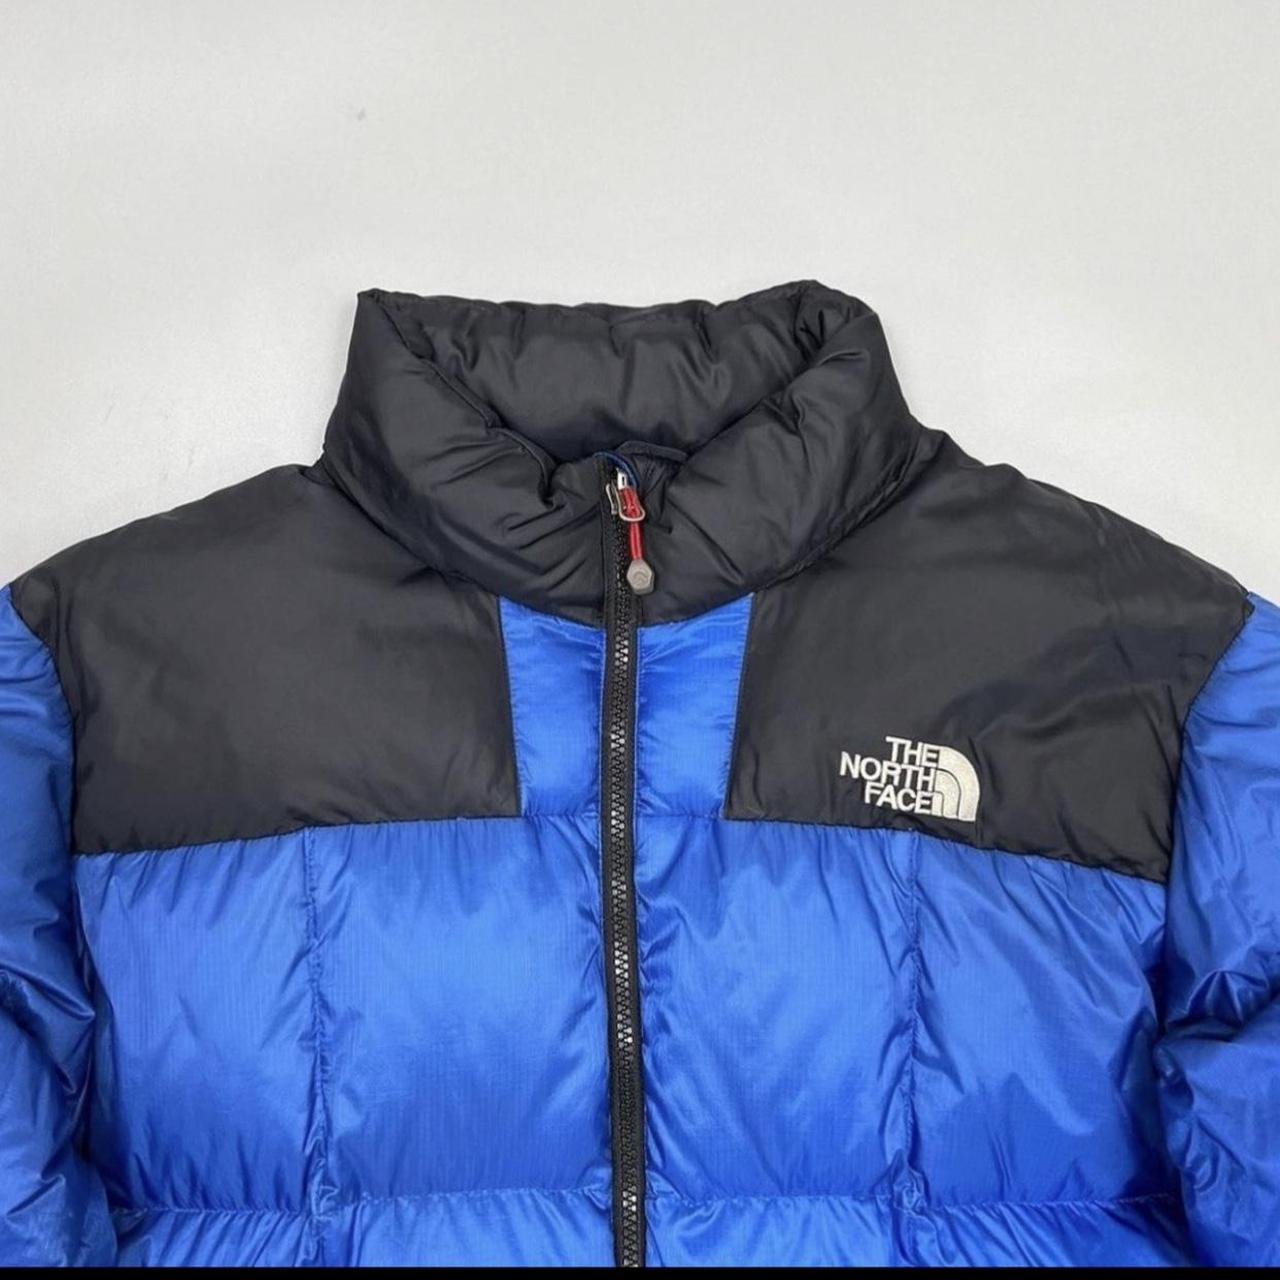 The North Face Men's Blue and Black Jacket (4)